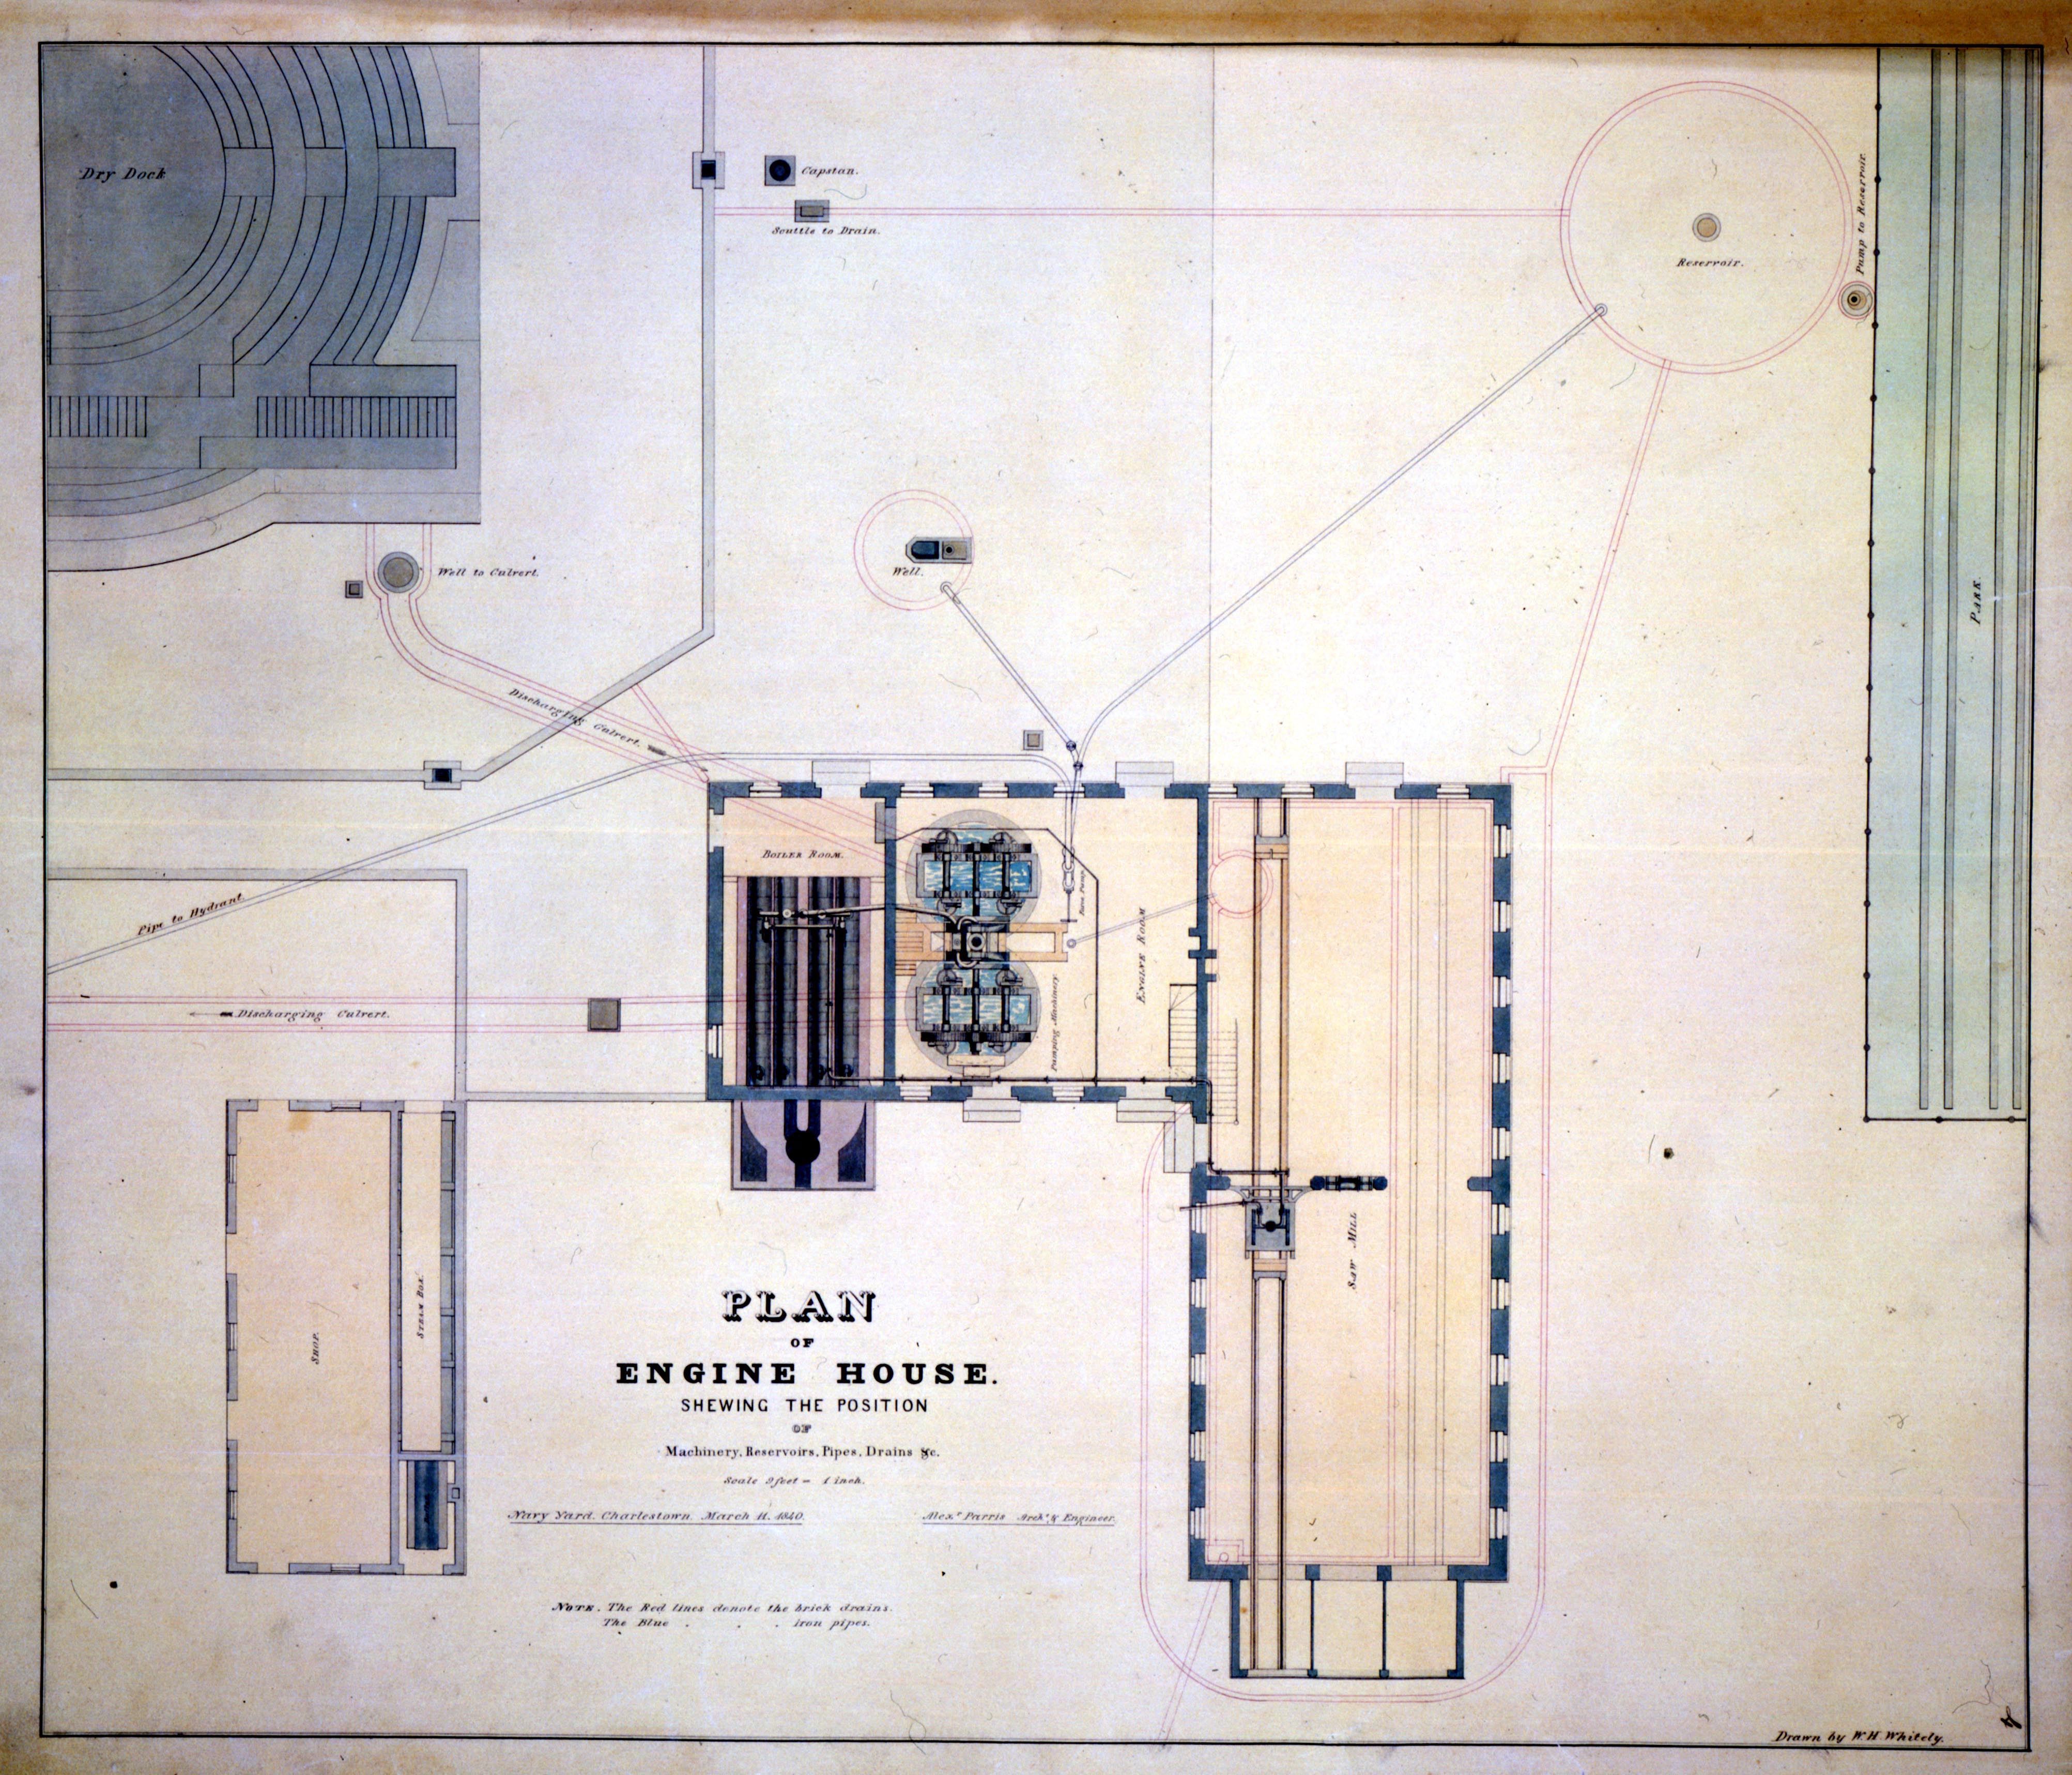 “Plan of Engine House Shewing (sic) the Position of Machinery, Reservoirs, Pipes, Drains & c.,” March 11, 1840. The channel connecting this building with the dry dock was sealed in 1976 – the same year the USS Constitution Museum opened to the public. [Courtesy National Park Service]